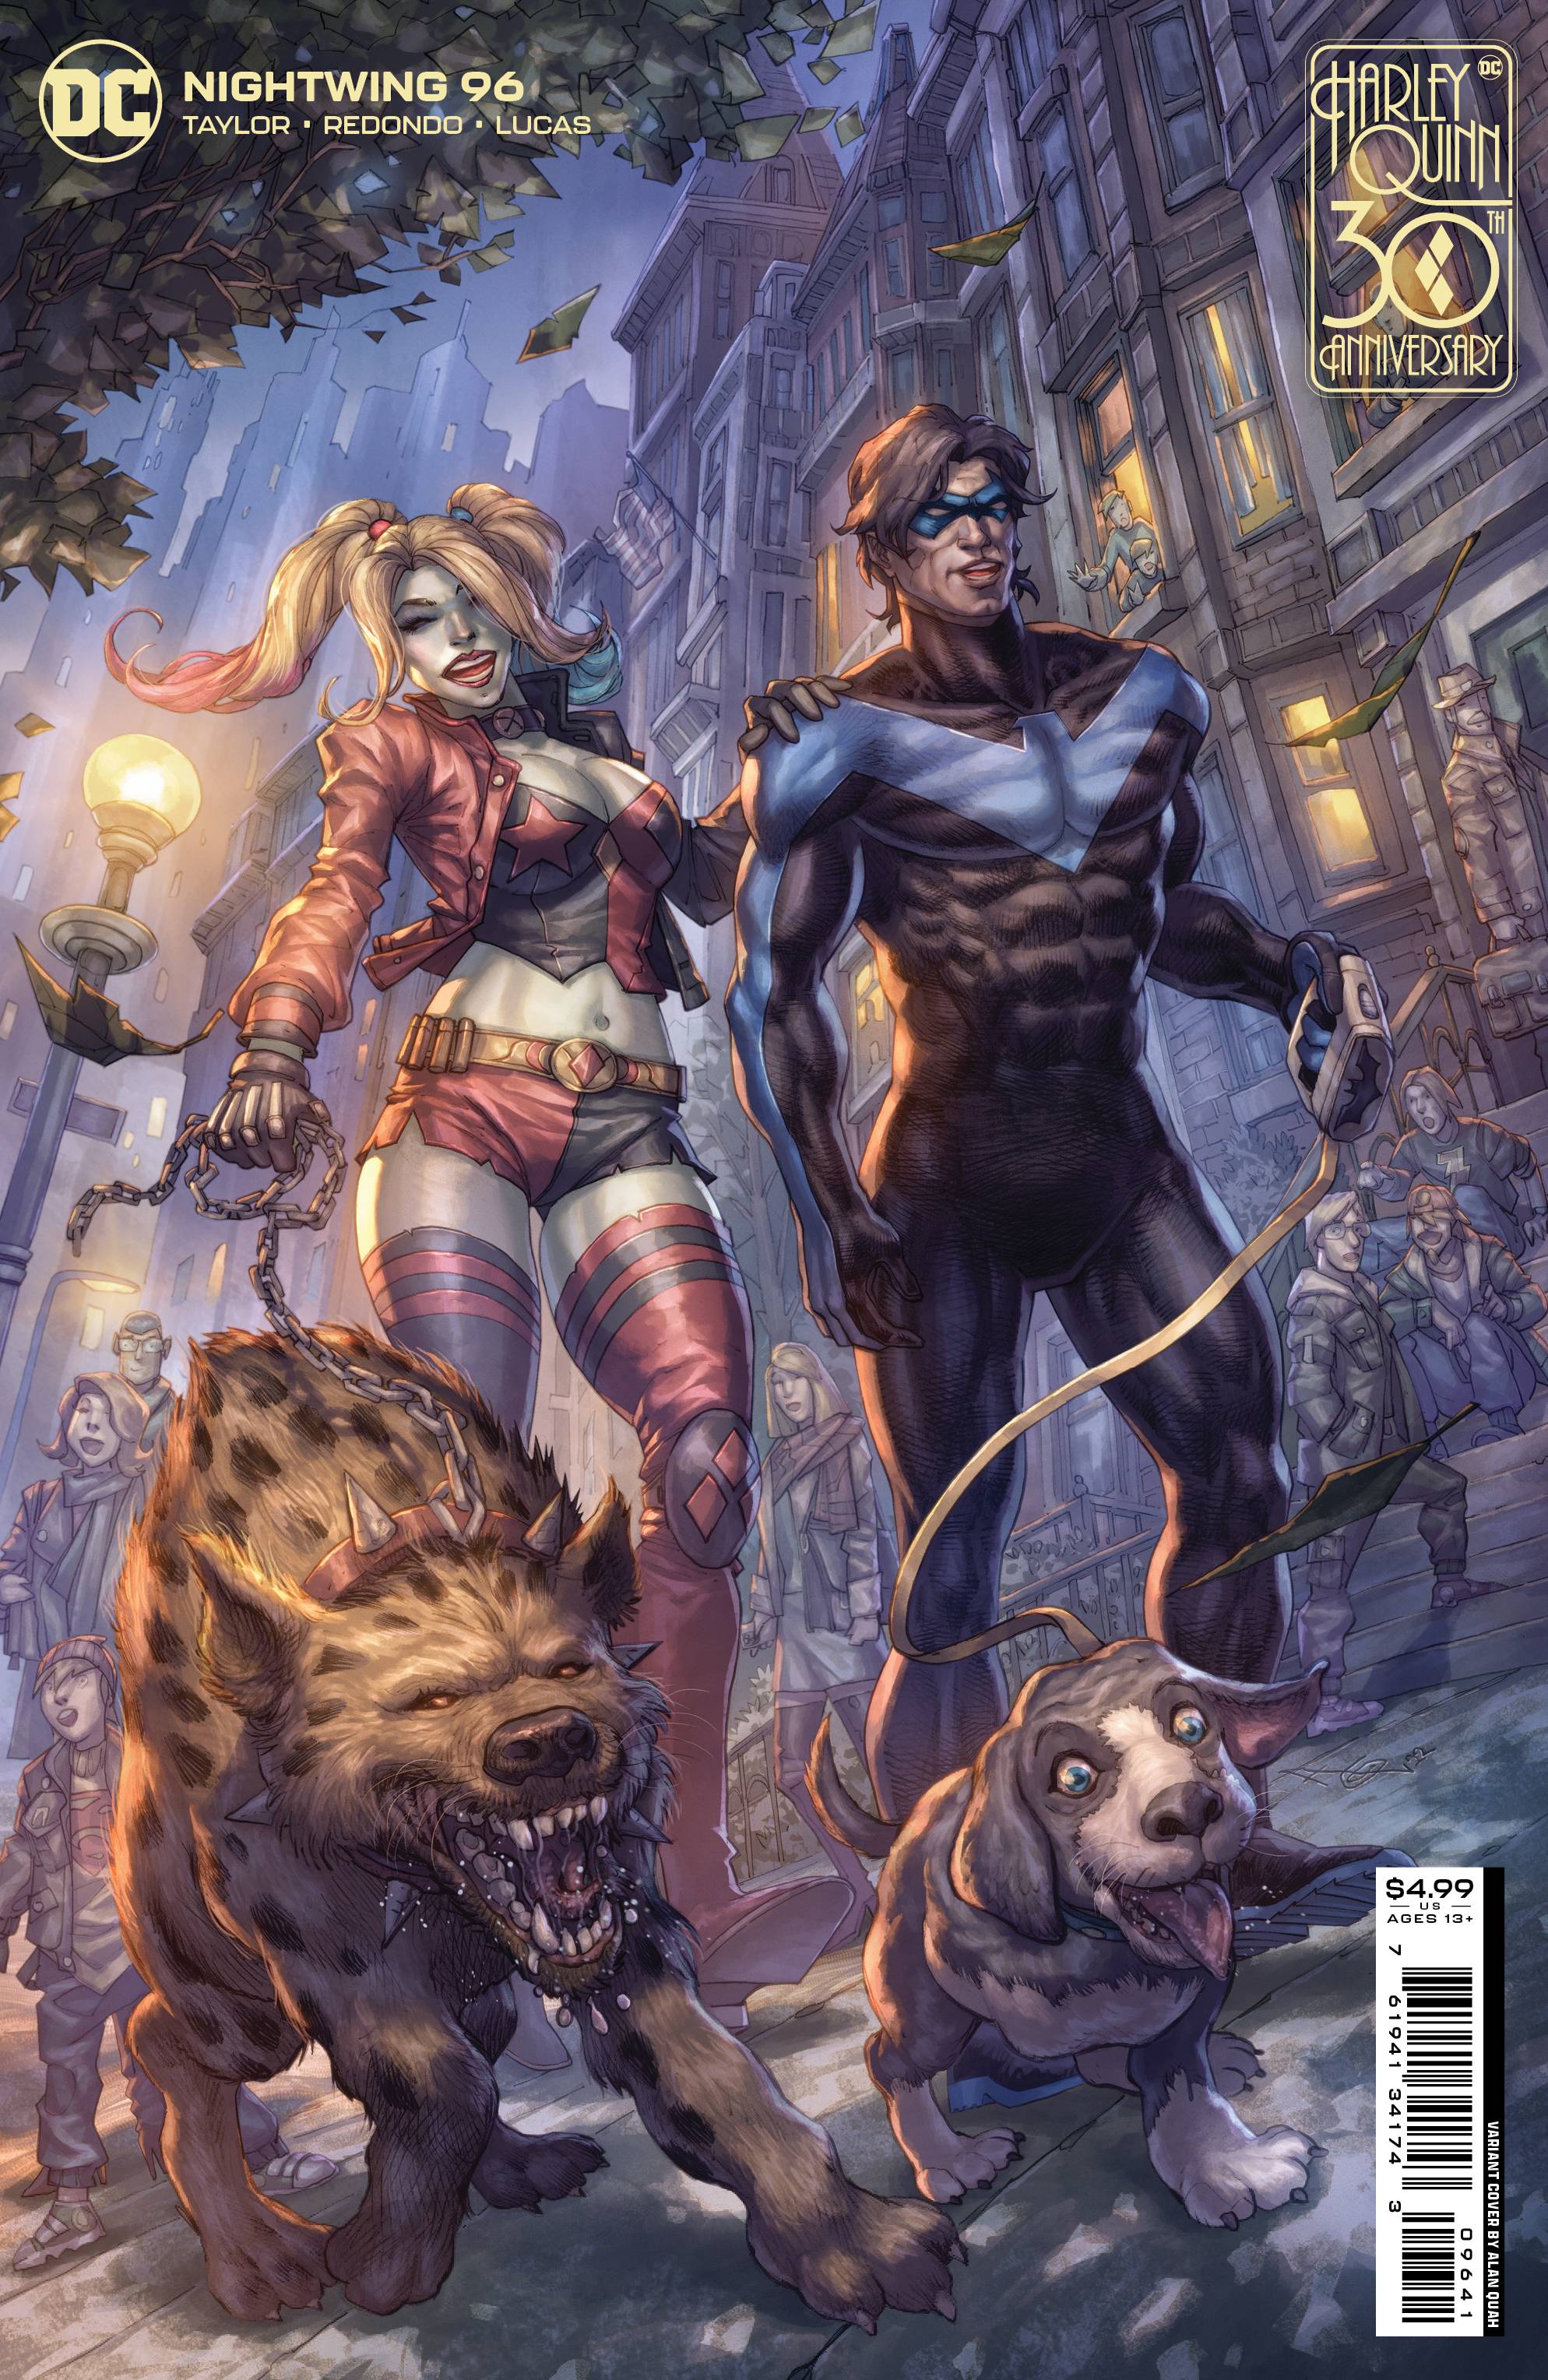 Harley quinn and nightwing comic